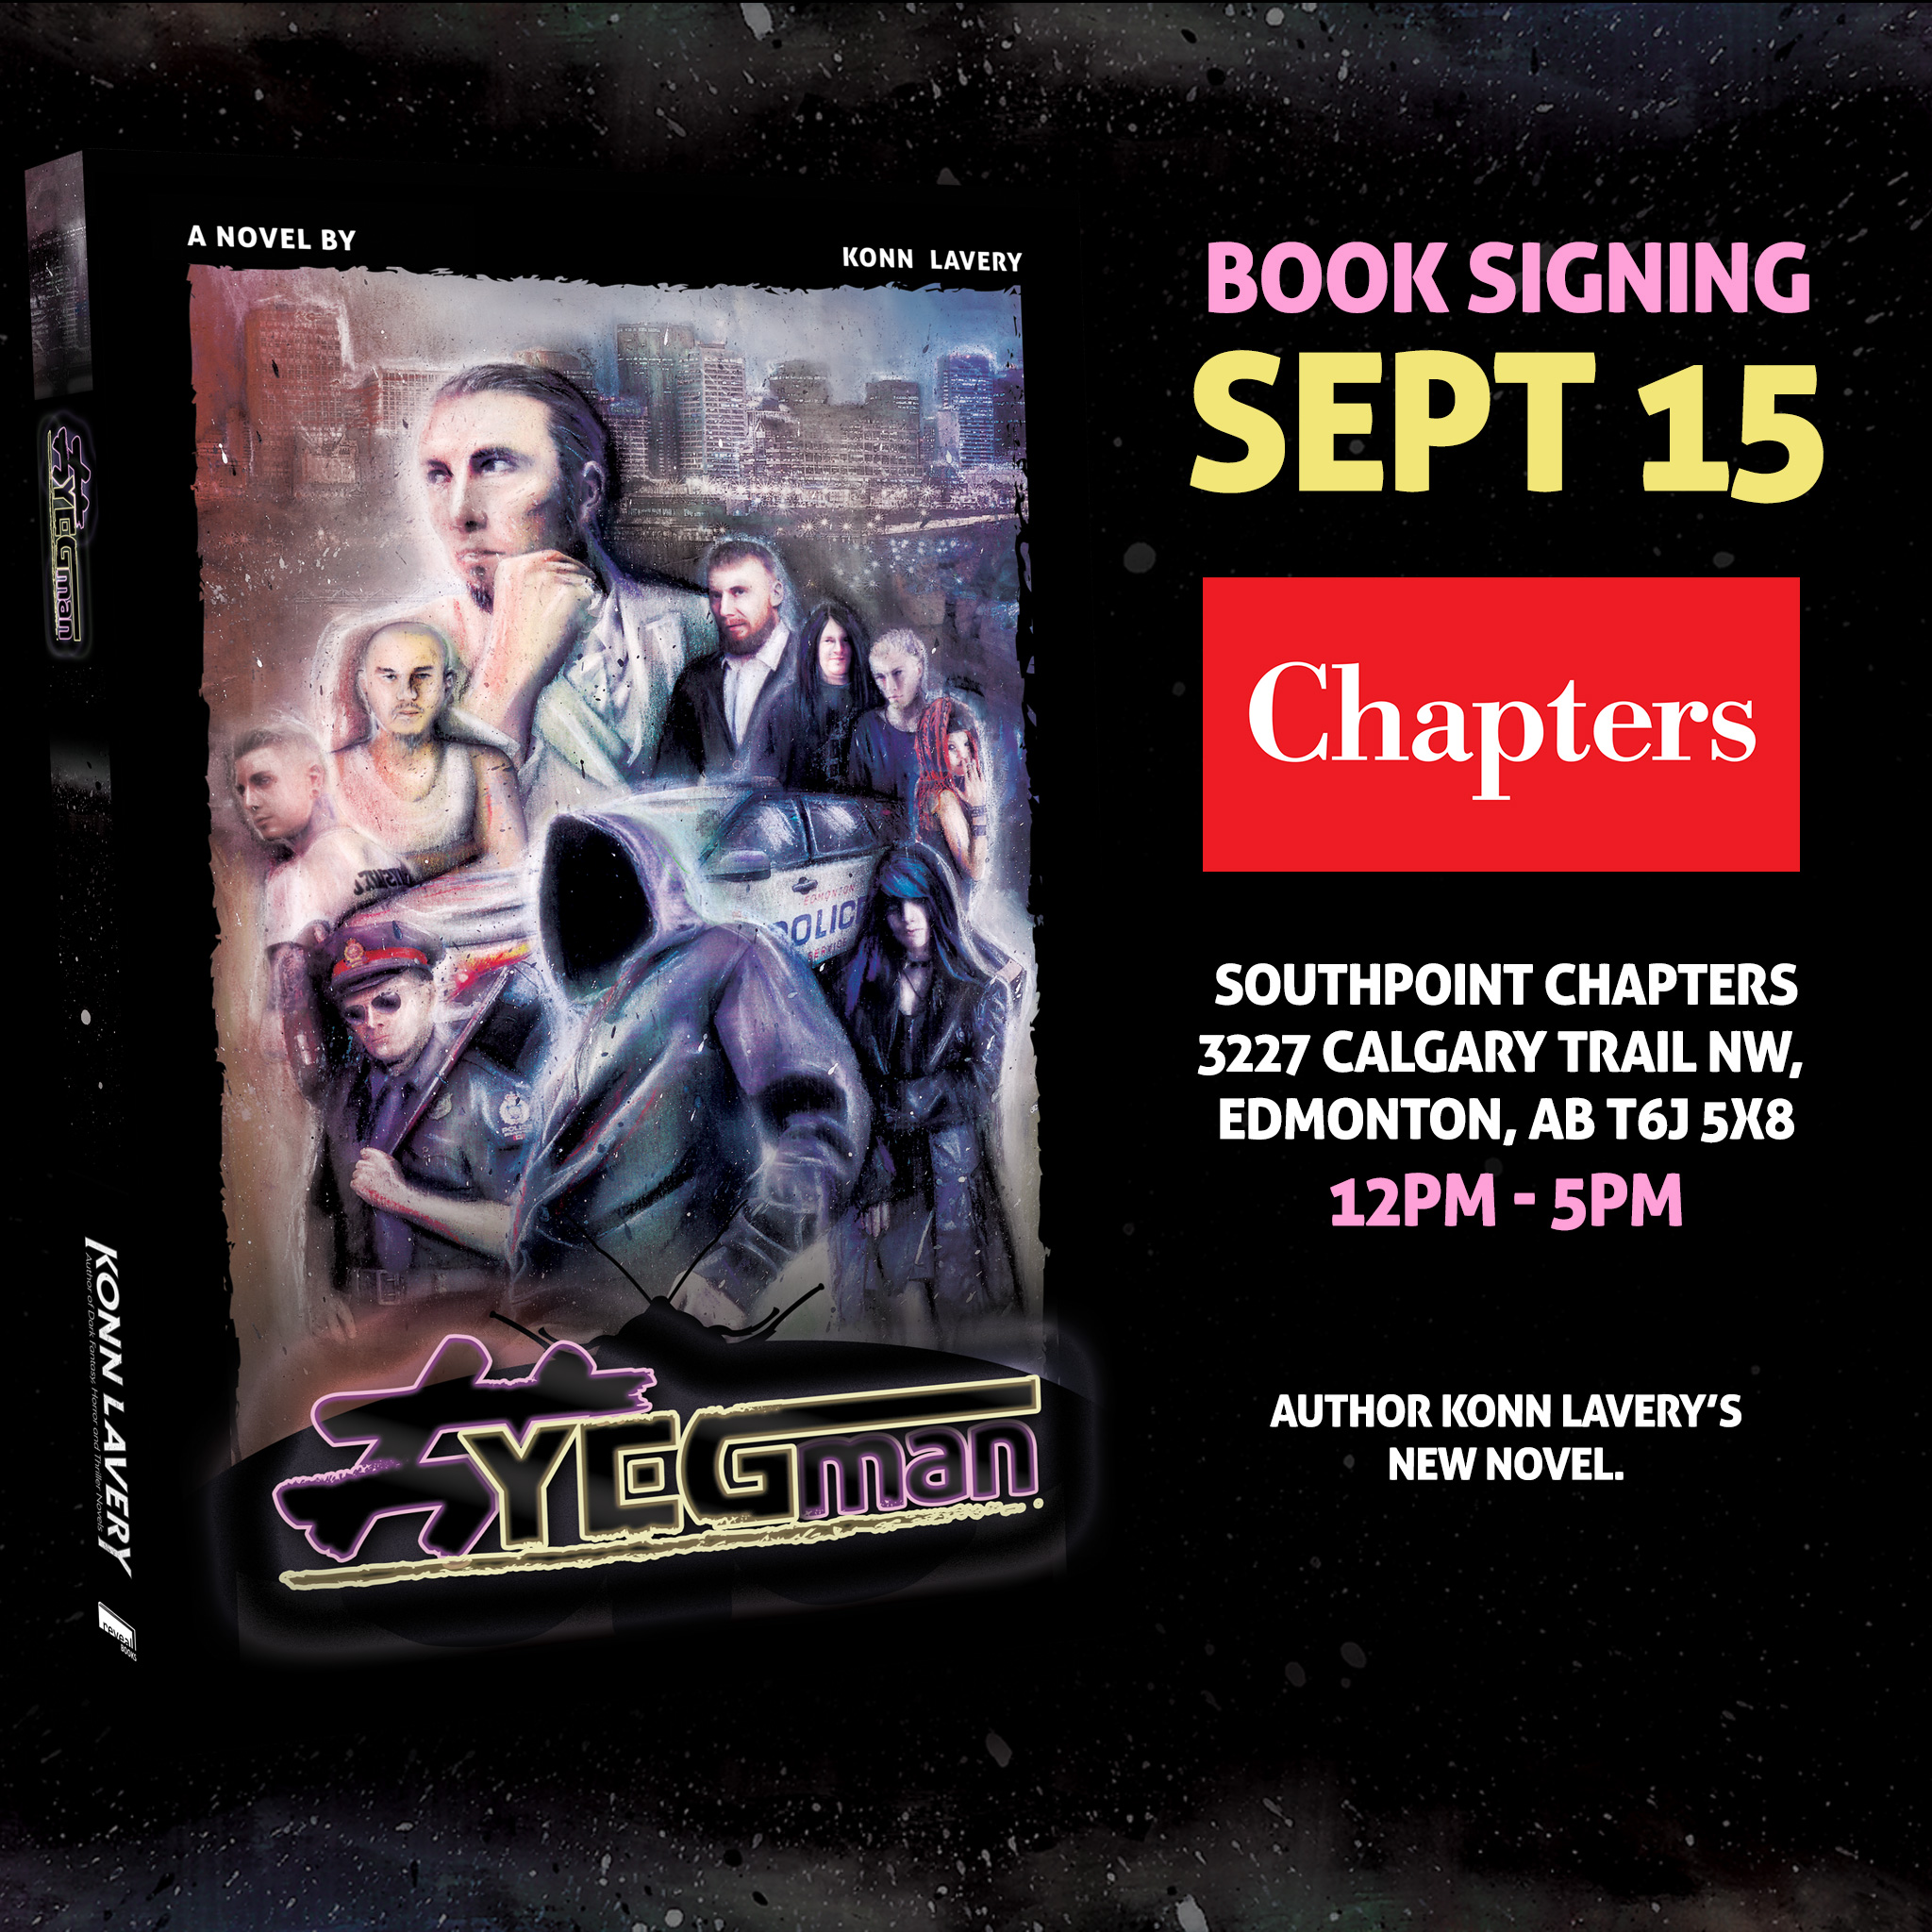 Edmonton Chapters Southpoint Book Signing